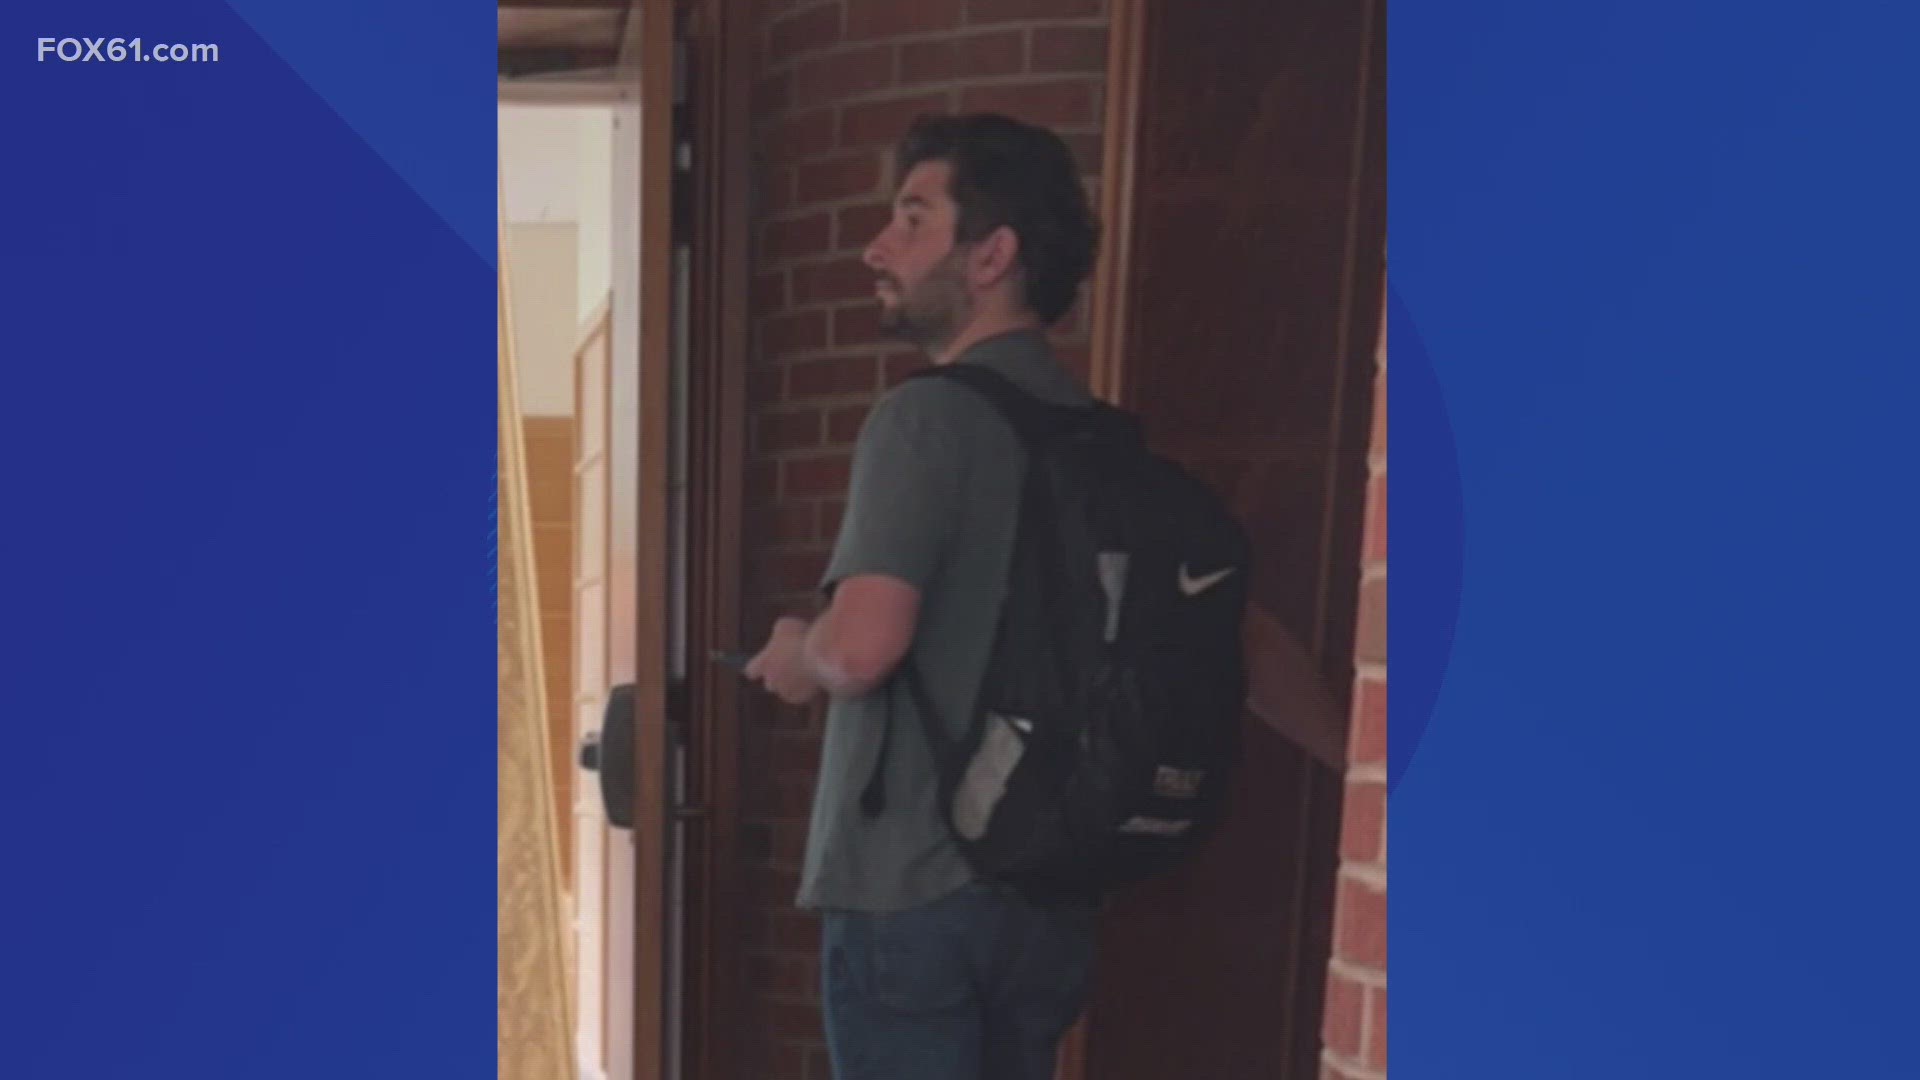 Police say the man identifies himself as "Jeff" and is around campus, but further investigation shows he isn't involved with the school at all.